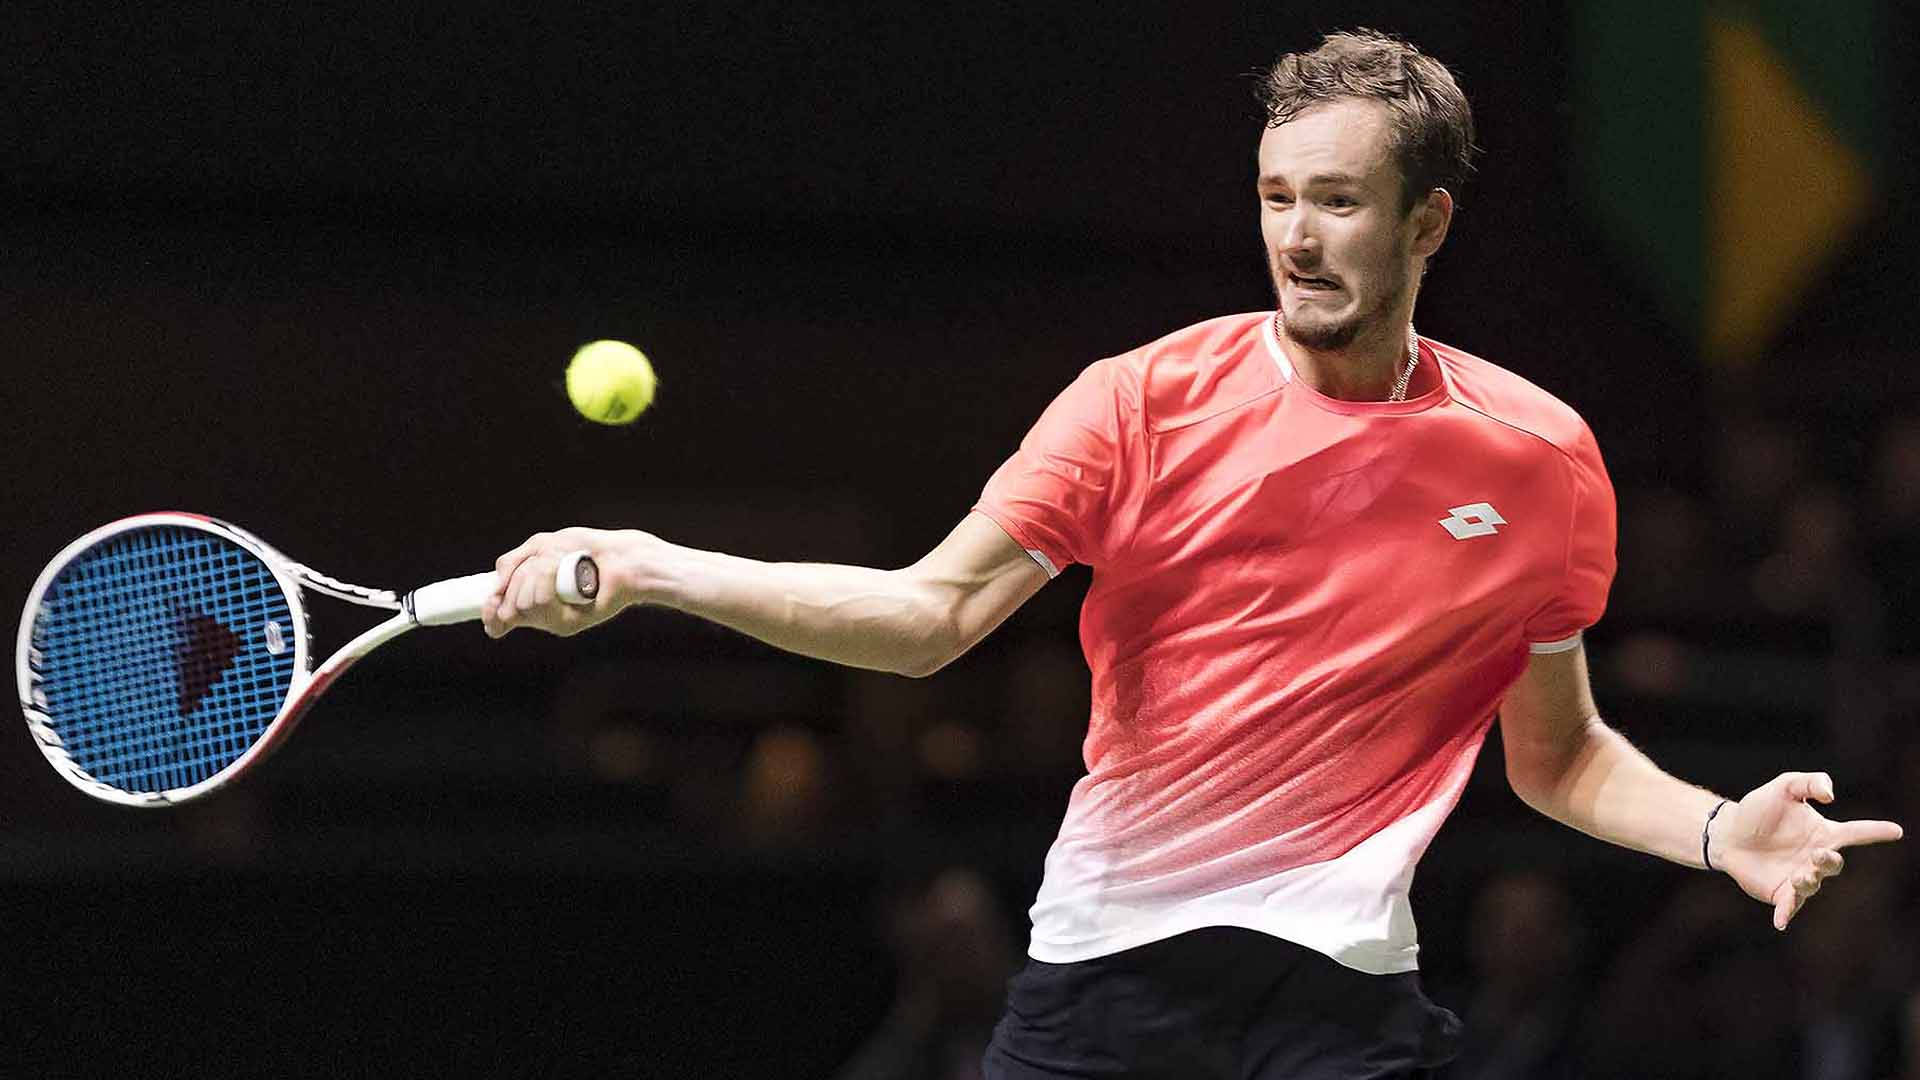 Daniil Medvedev Executes A Forehand Shot With Finesse.